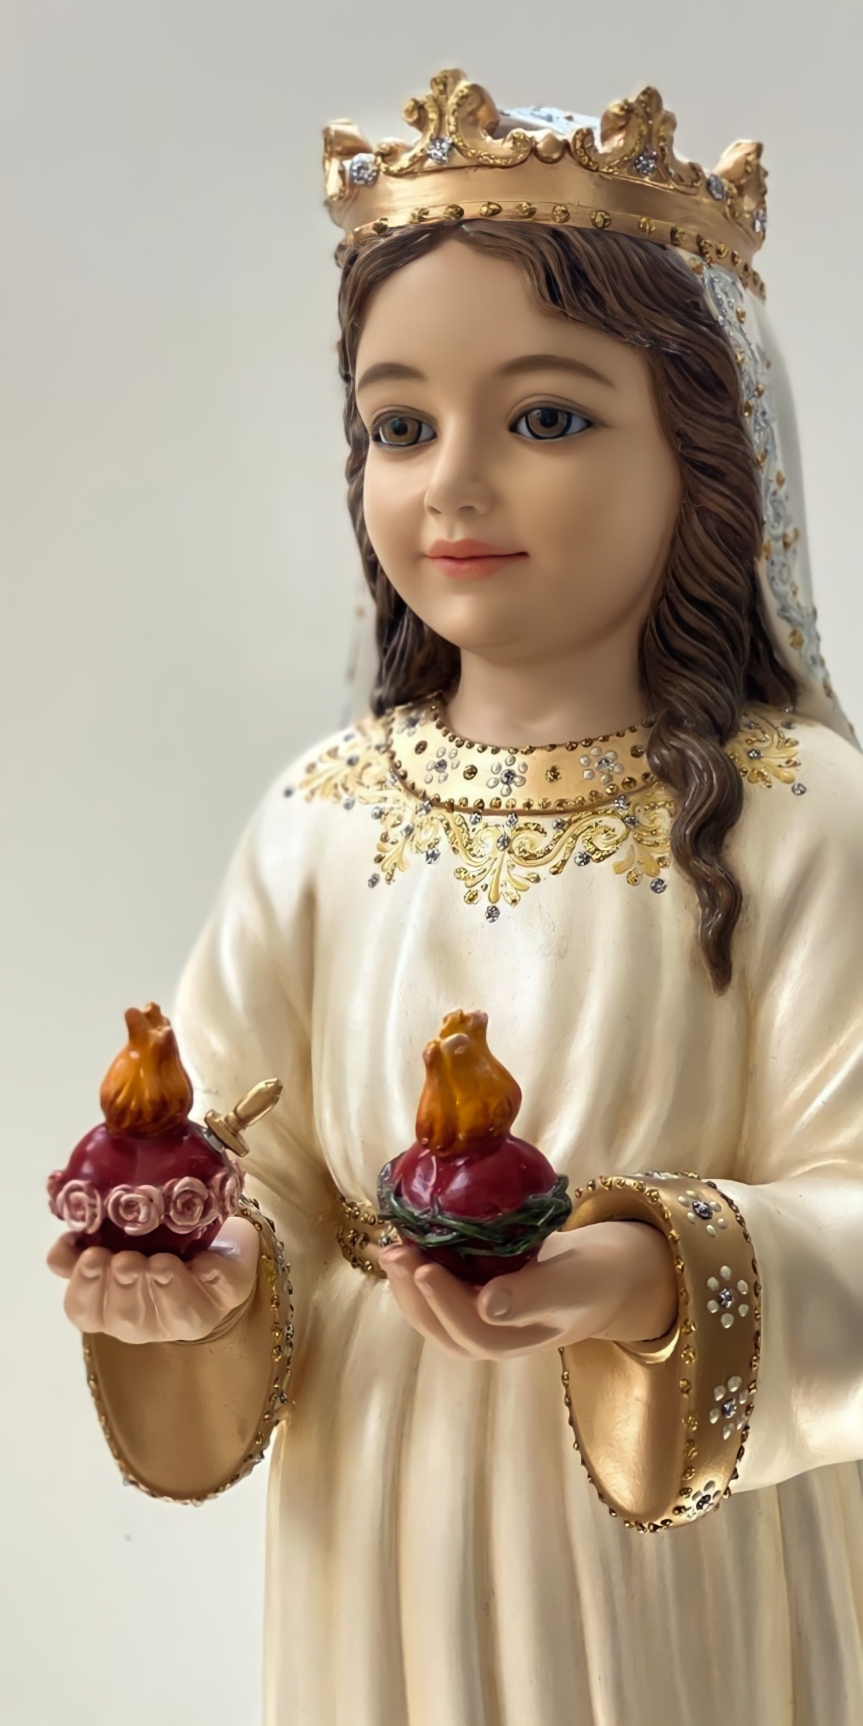 Infant Mary, HD Image